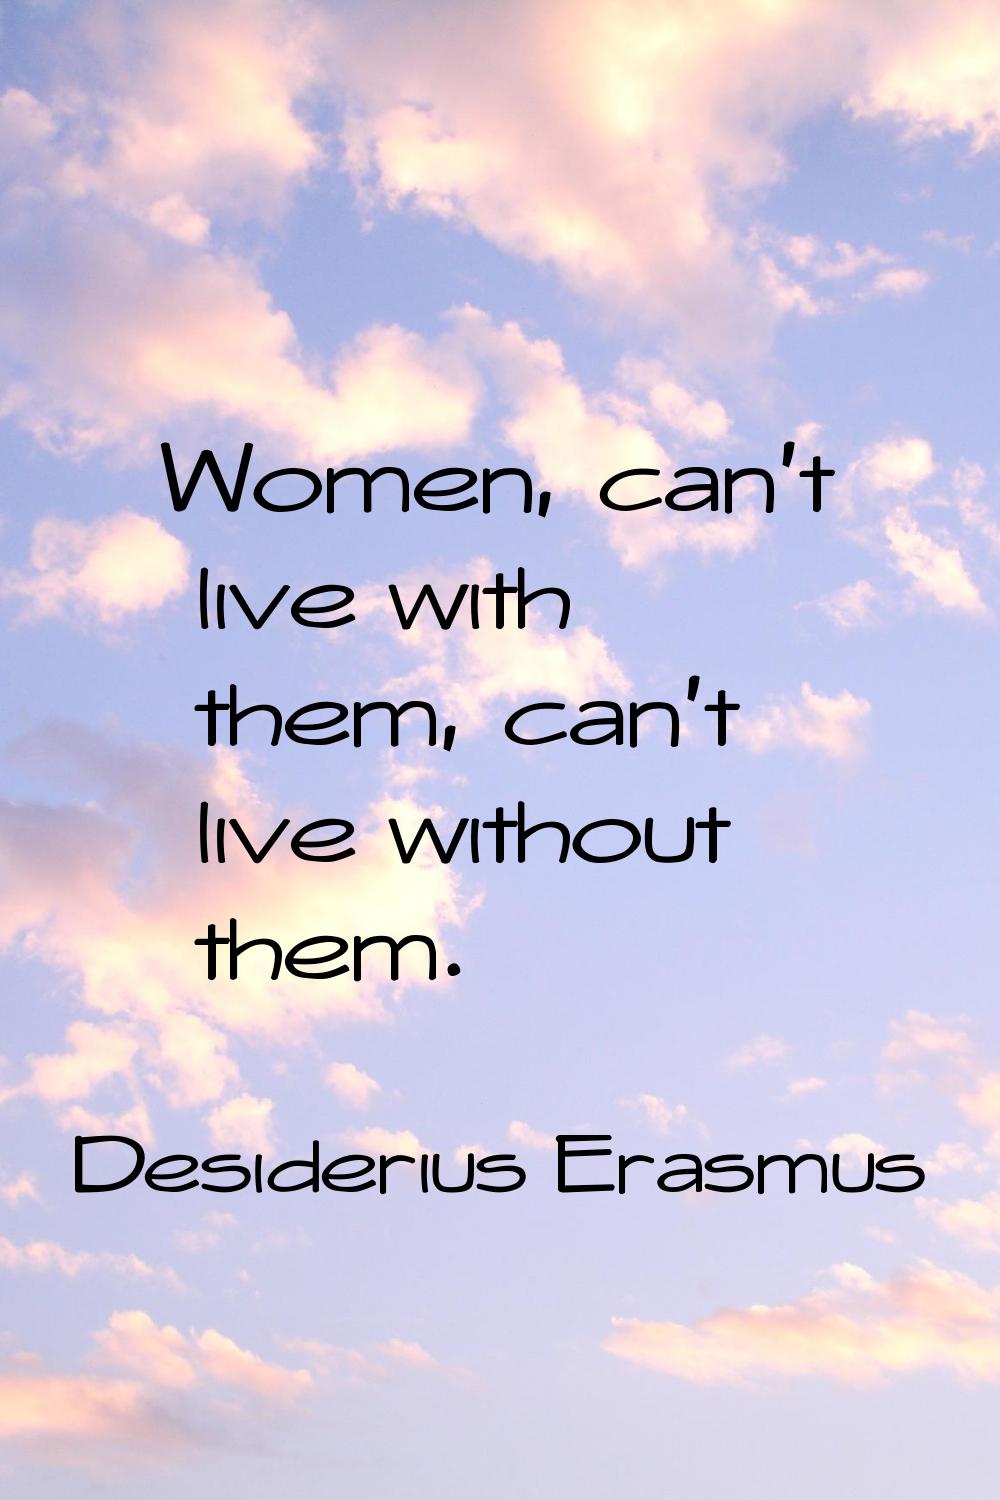 Women, can't live with them, can't live without them.